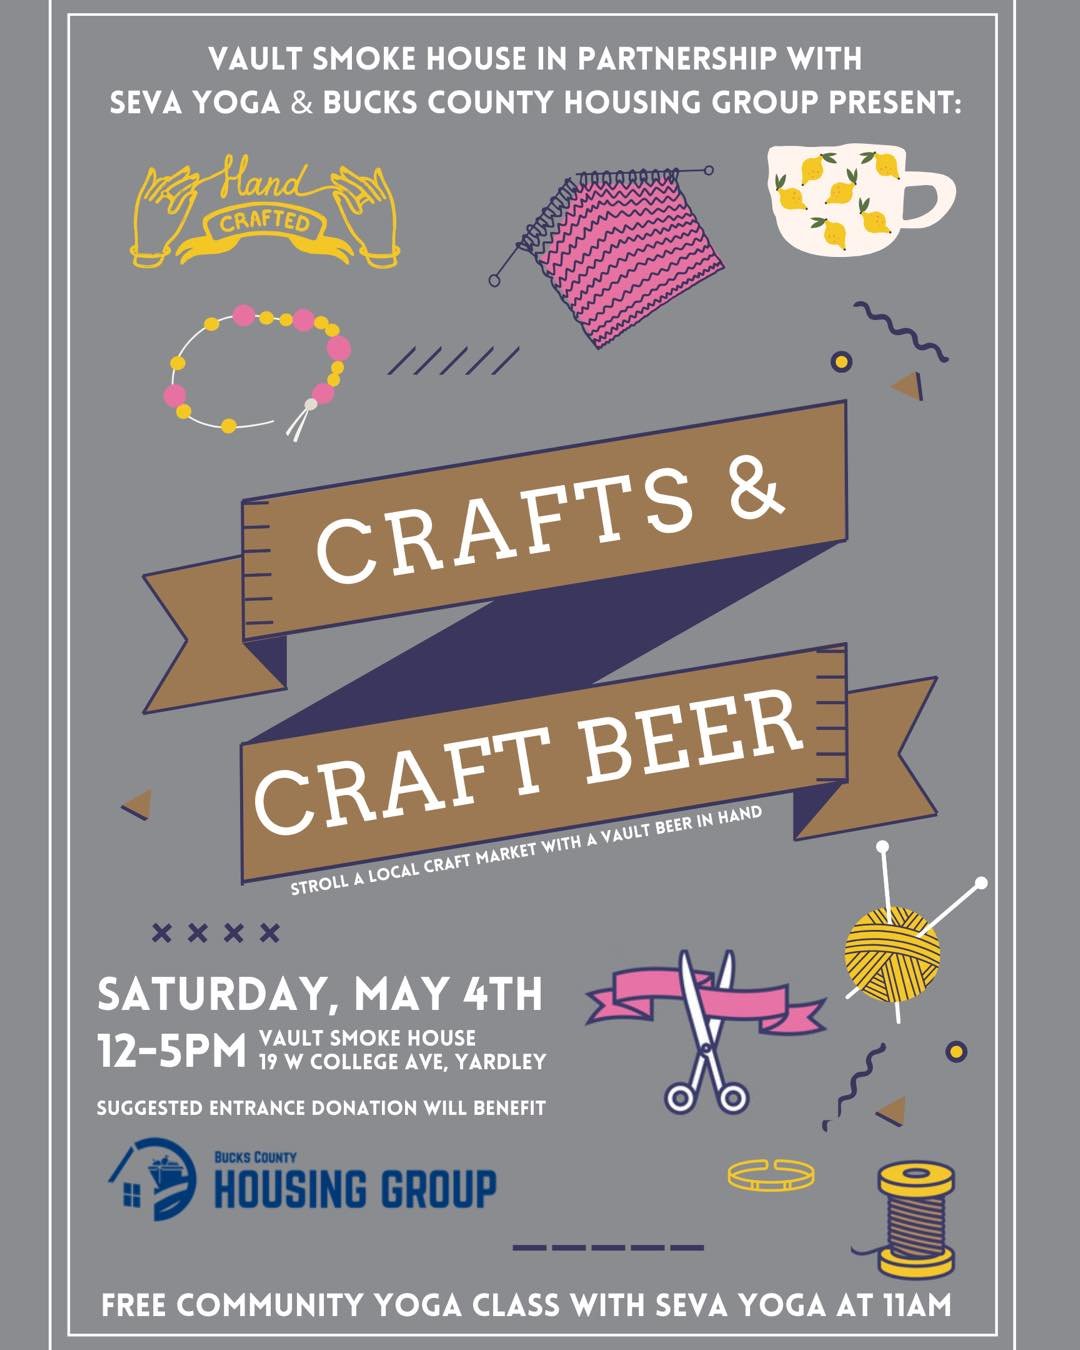 &hellip;diiid y&rsquo;all know that we are hosting a very cute craft market this Saturday at Vault Smoke House? and we will be there with some coffee to get your day going?!?

that&rsquo;s right! this Saturday, May 4th, we are gathering as many local